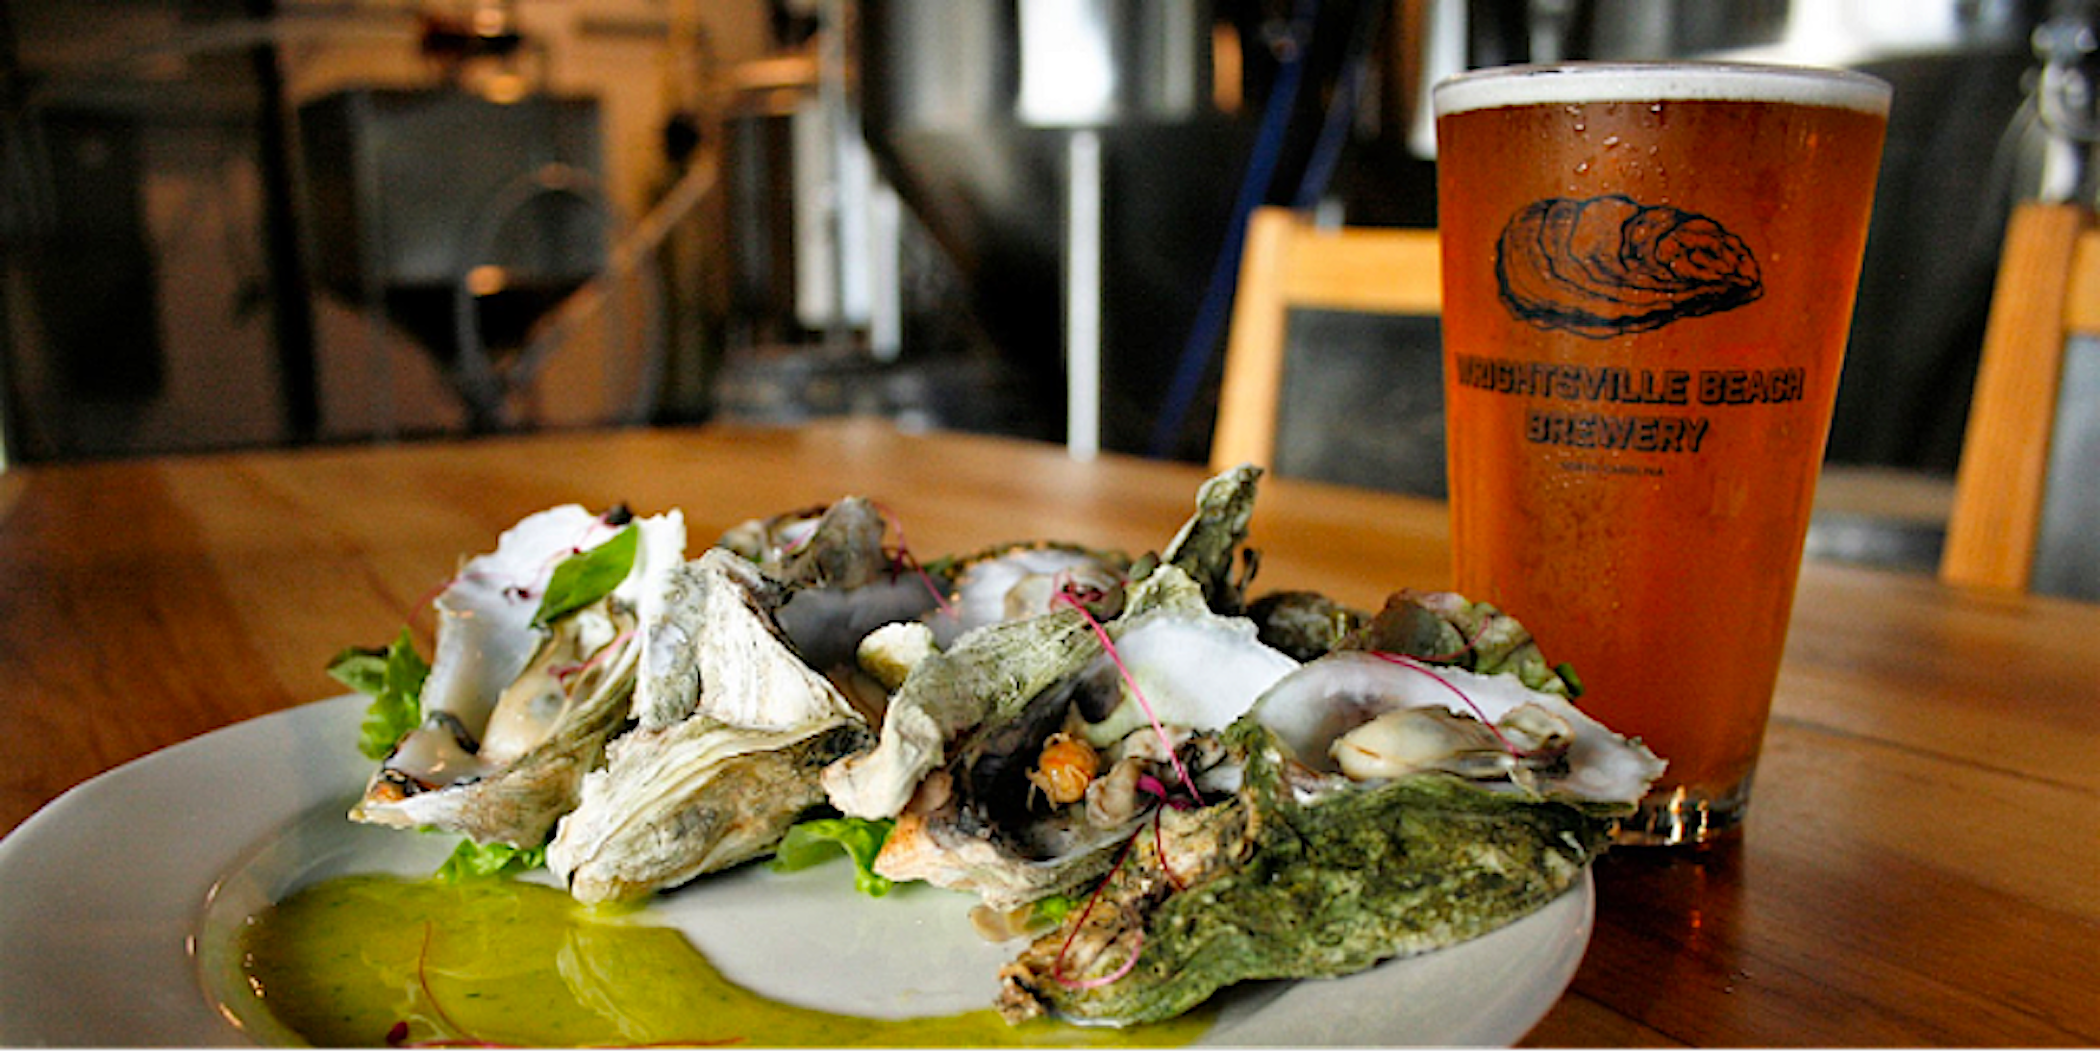 image: A delicacy at Wrightsville Beach Brewery.